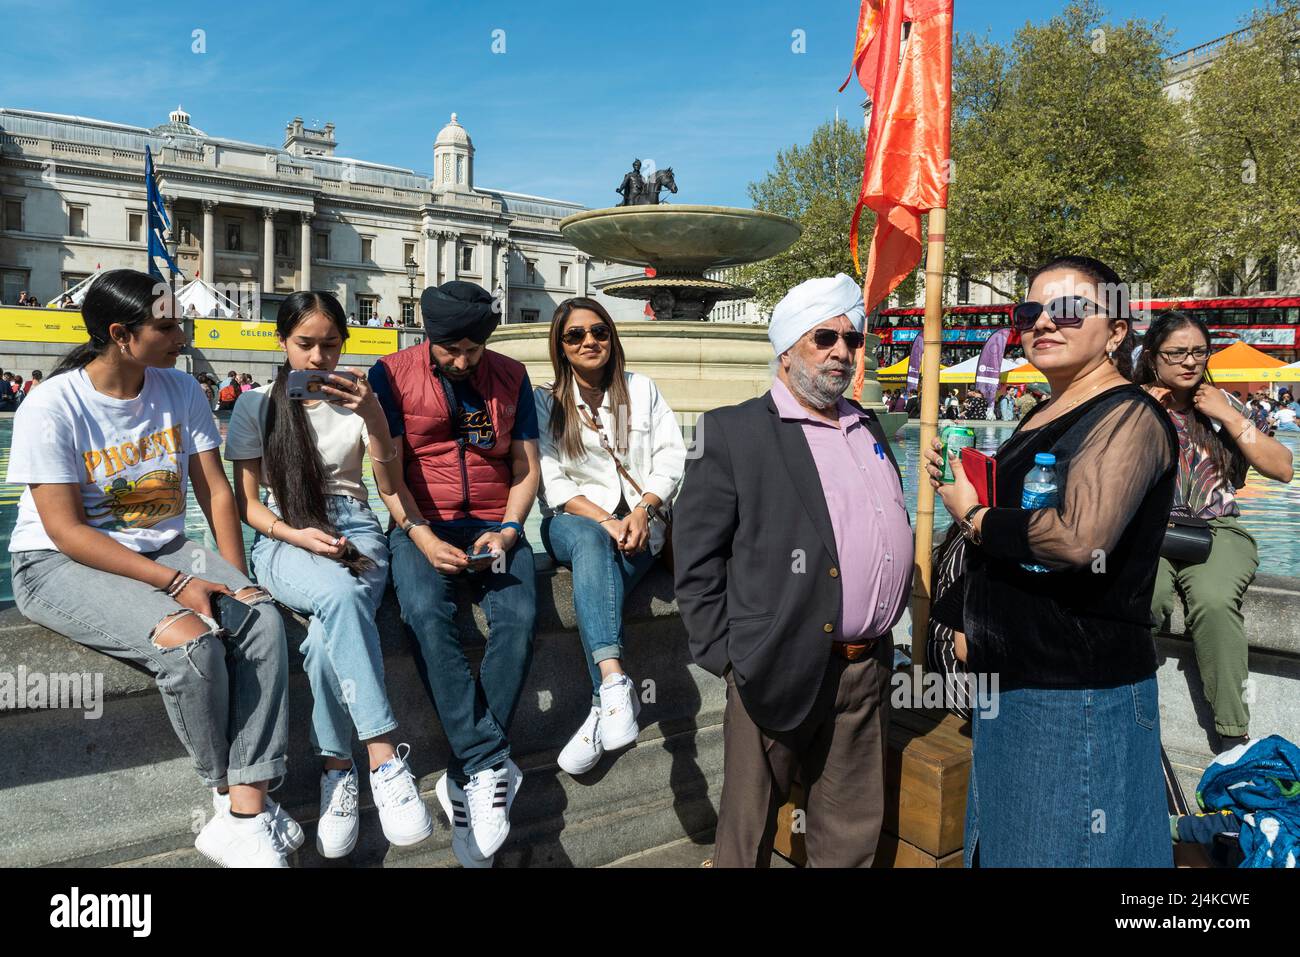 London, UK.  16 April 2022.  People take part in the Vaisakhi festival in Trafalgar Square.  The event marks the Sikh New Year and is a celebration of Sikh and Punjabi culture.  Credit: Stephen Chung / Alamy Live News Stock Photo